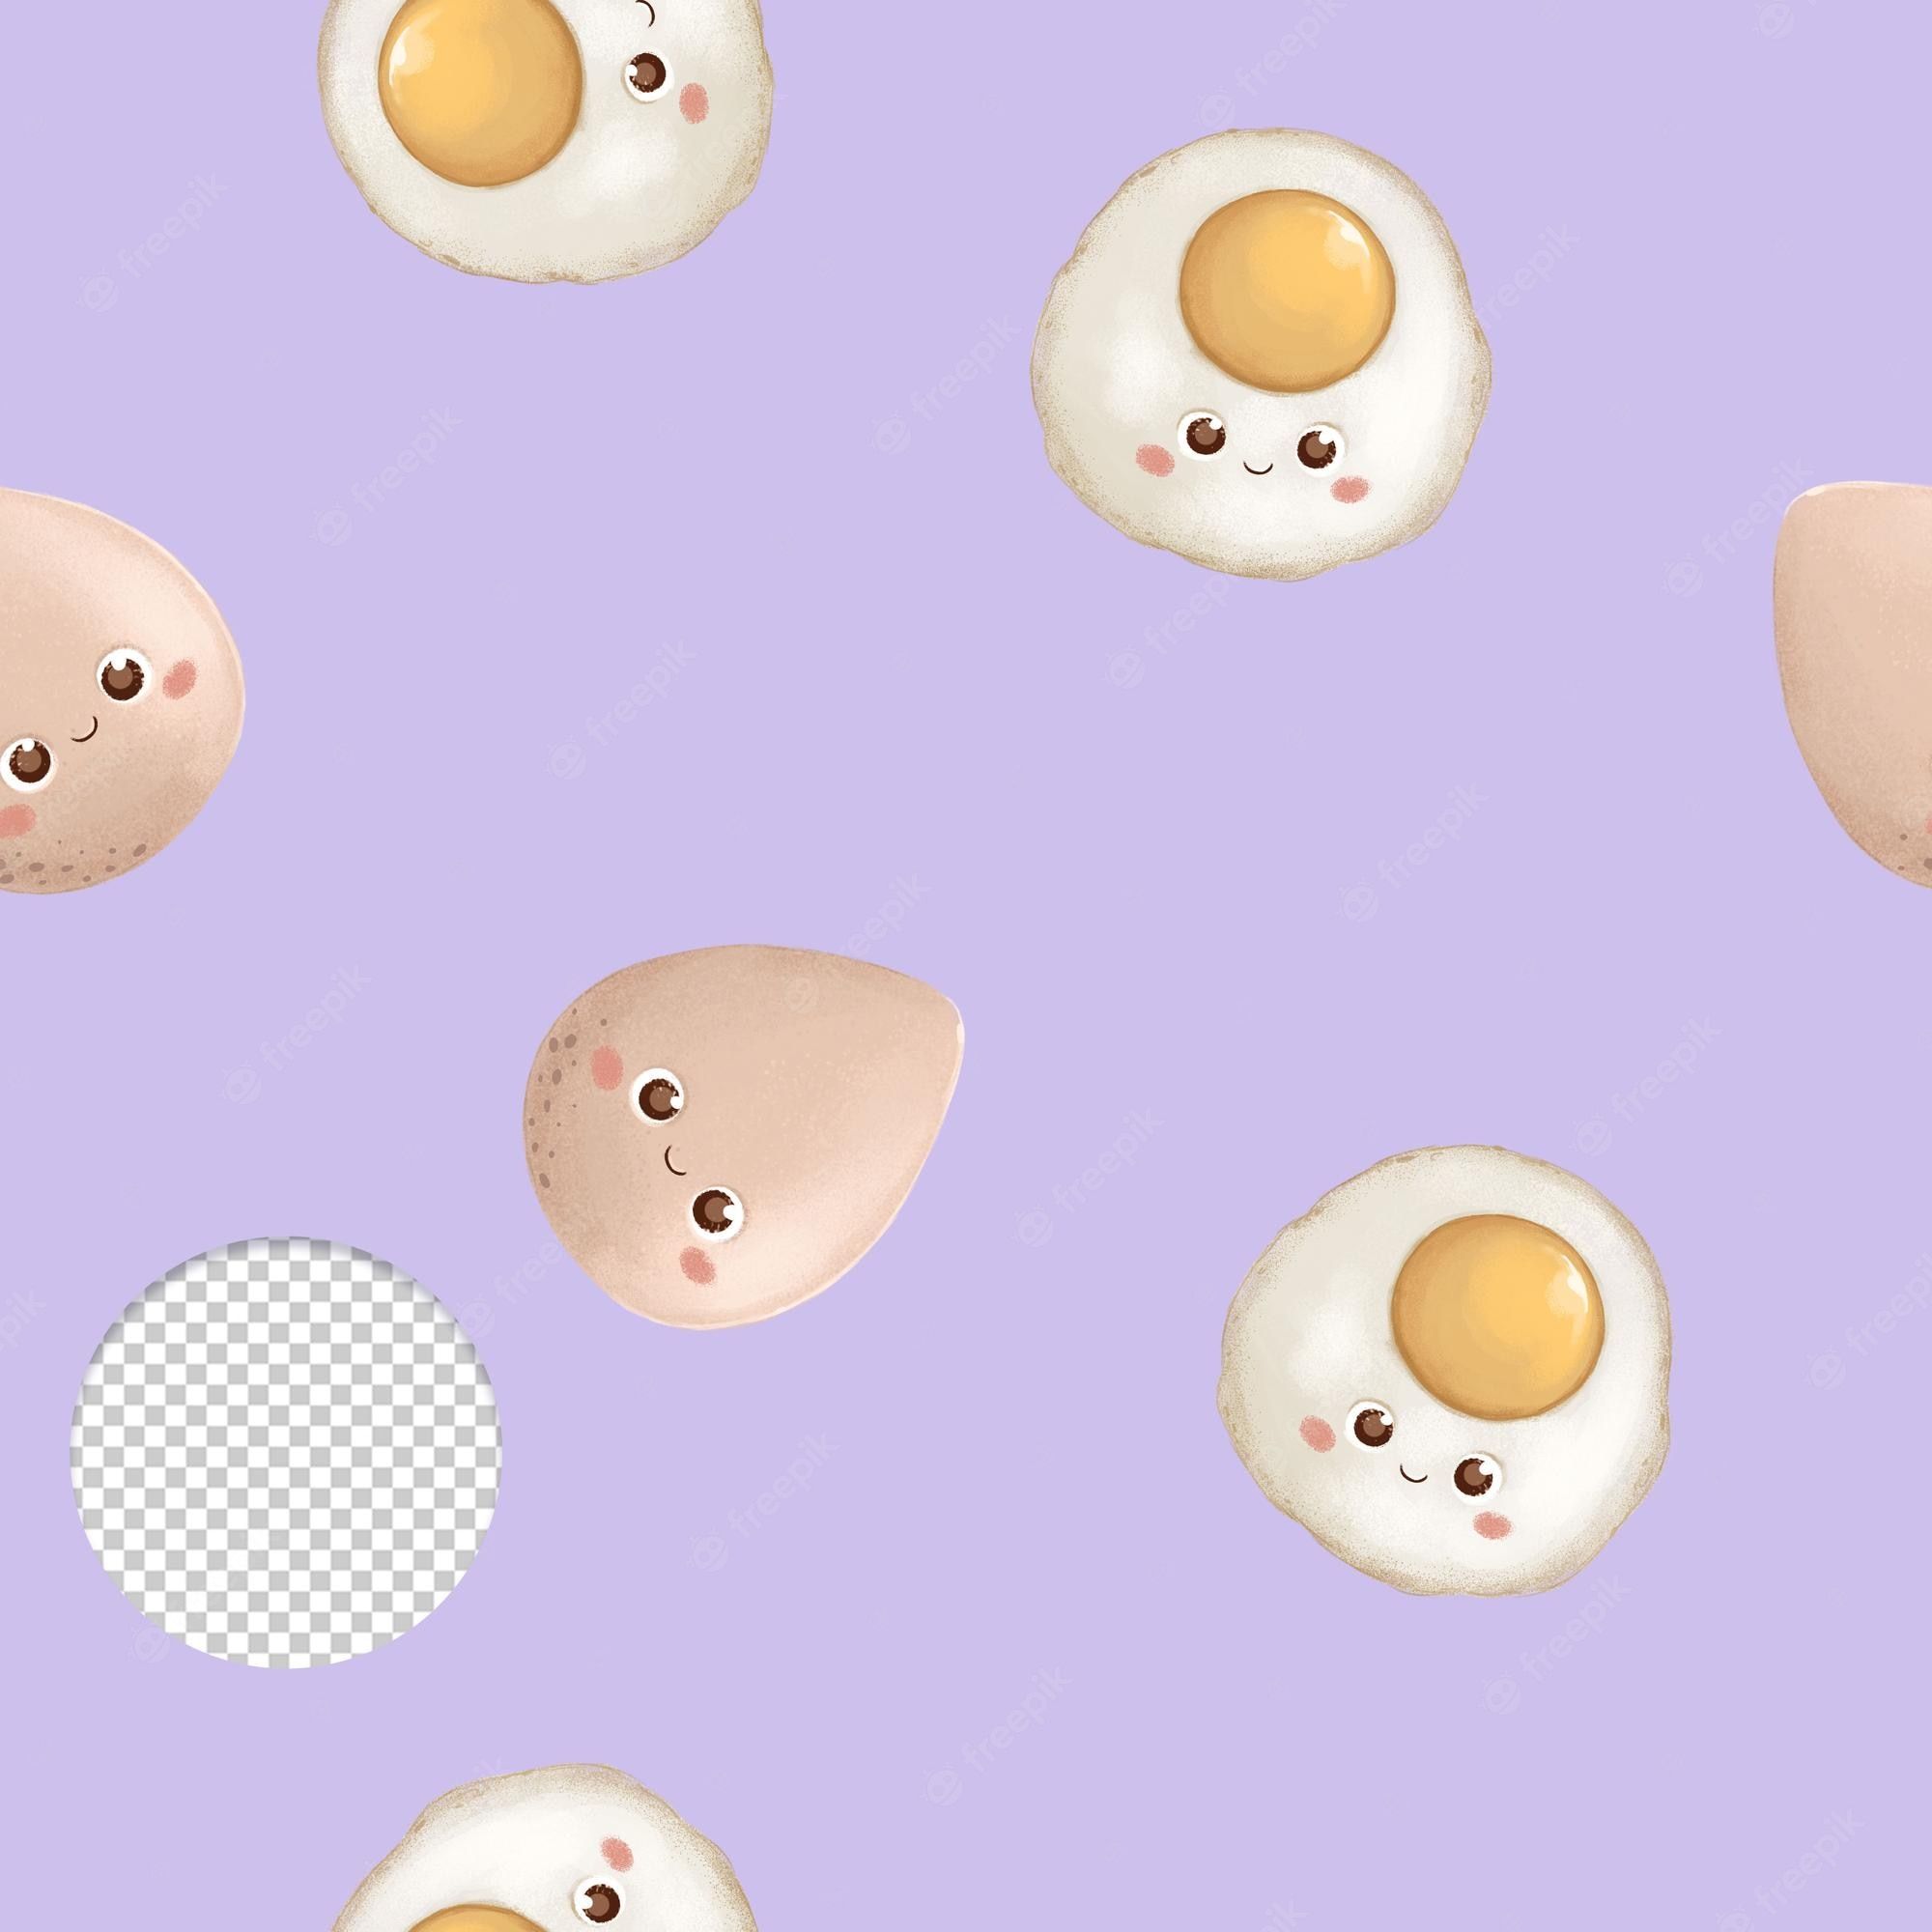 A pattern of eggs and chickens on purple background - Egg